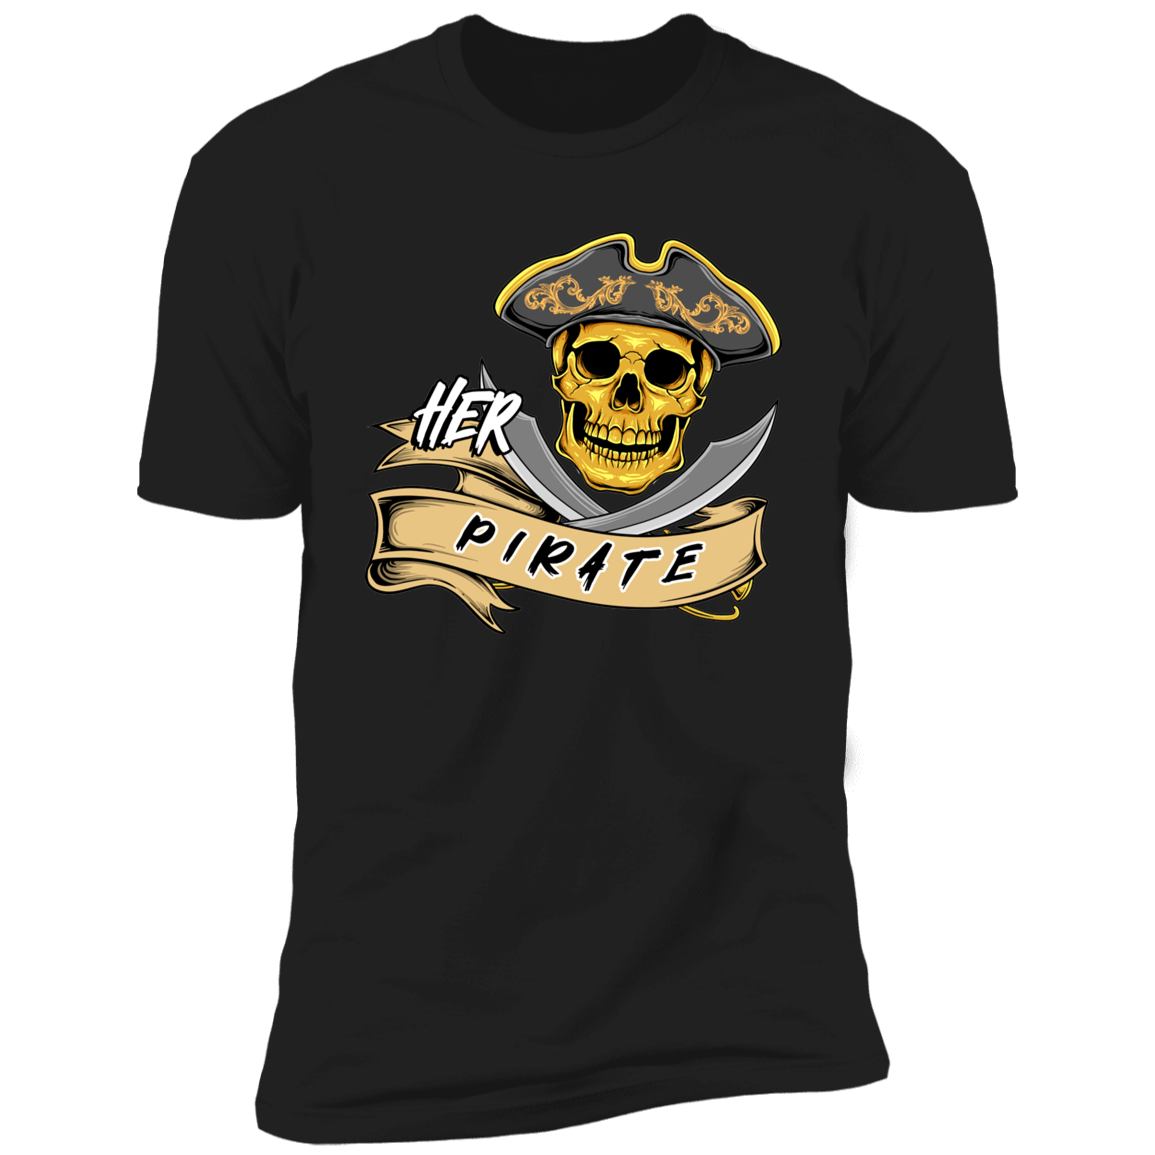 Her Pirate & His Booty Couples Cruise Shirts